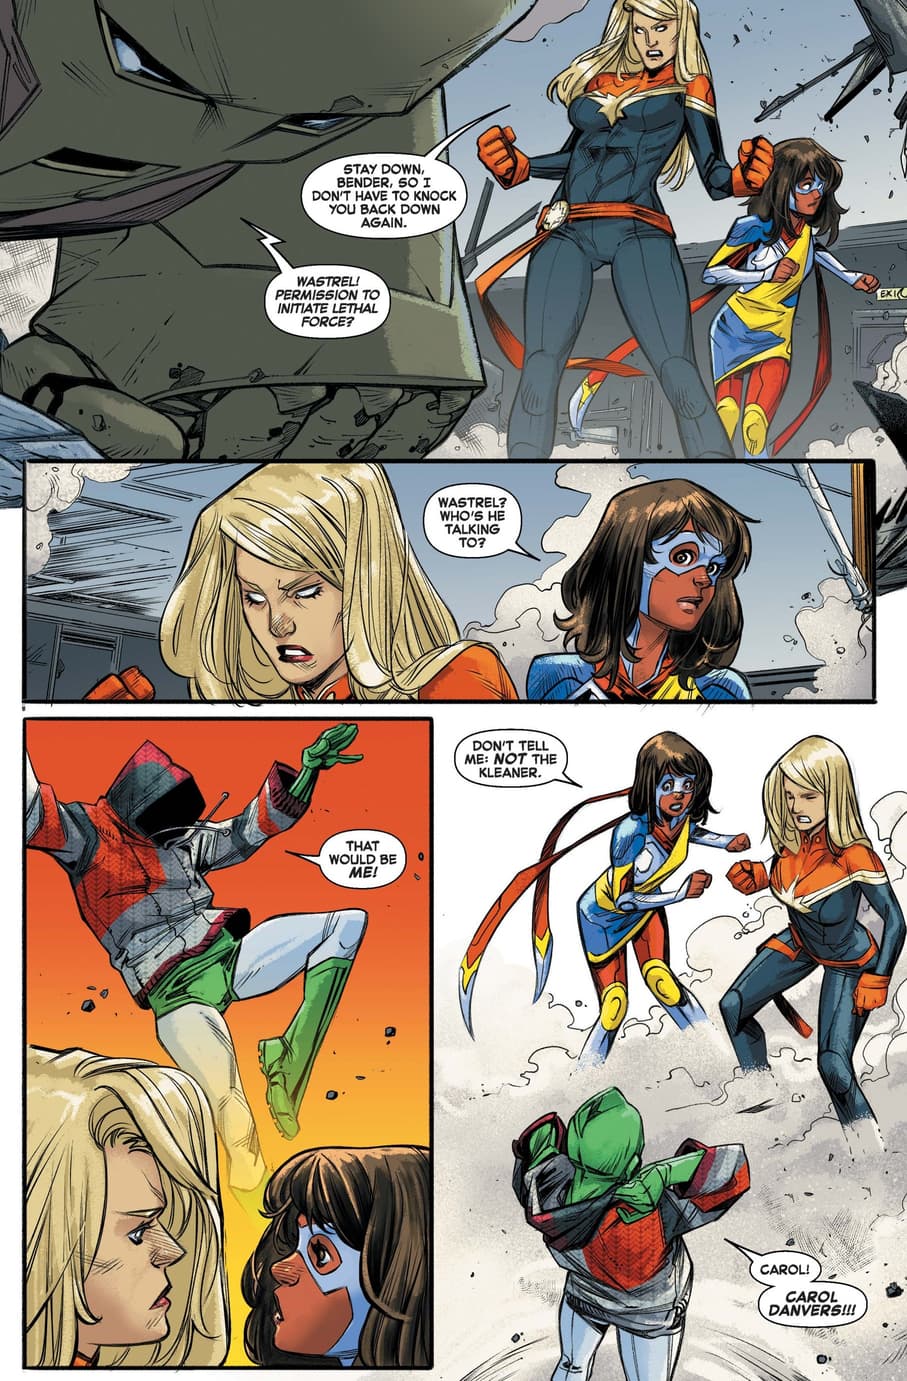 Carol confronts an important figure from her past in MS. MARVEL TEAM-UP (2019) #4.